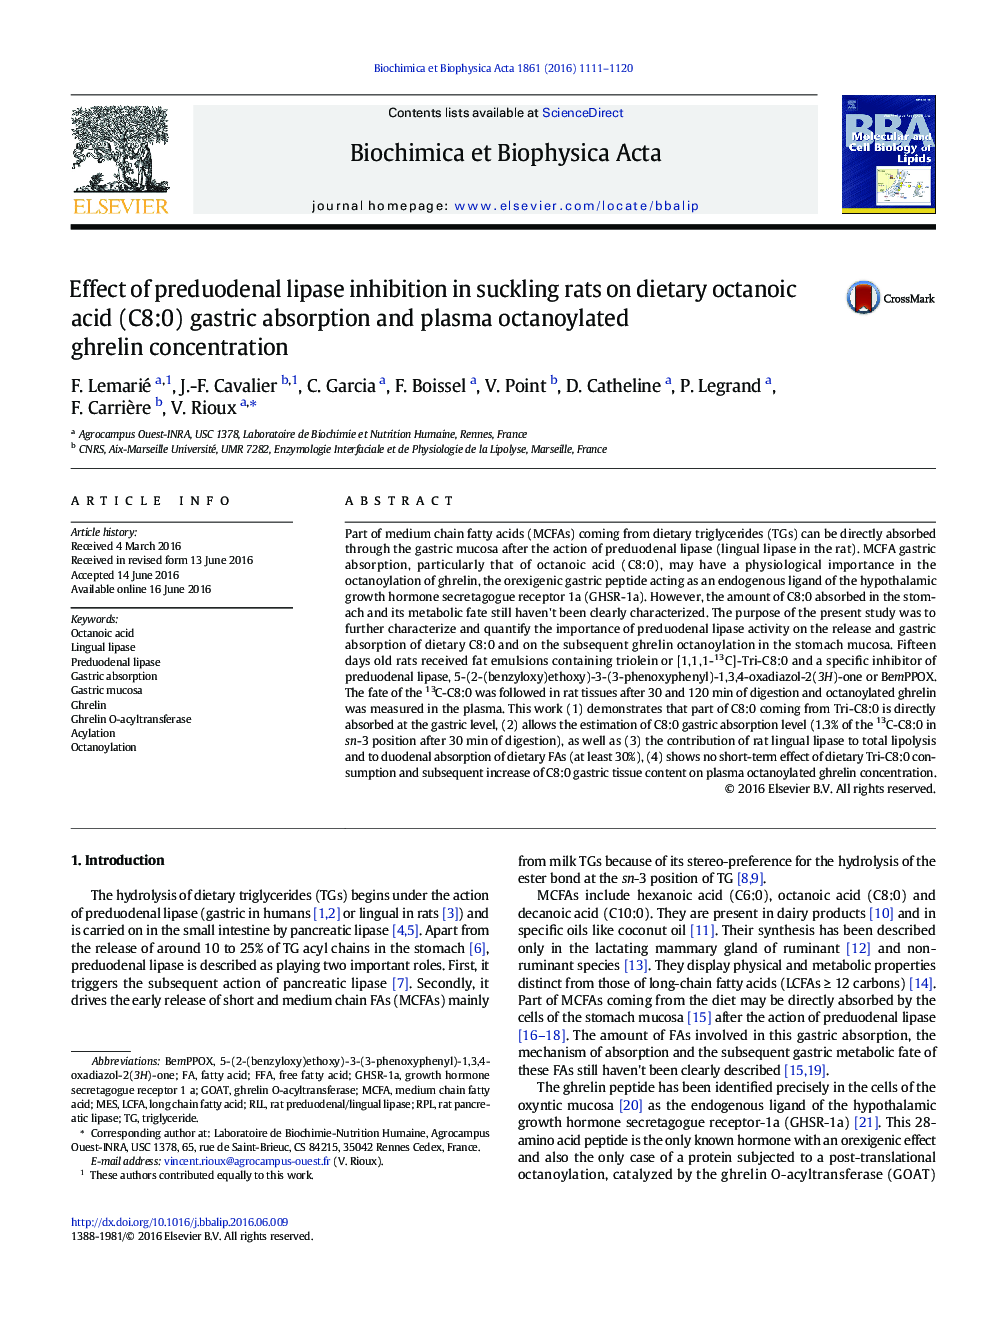 Effect of preduodenal lipase inhibition in suckling rats on dietary octanoic acid (C8:0) gastric absorption and plasma octanoylated ghrelin concentration